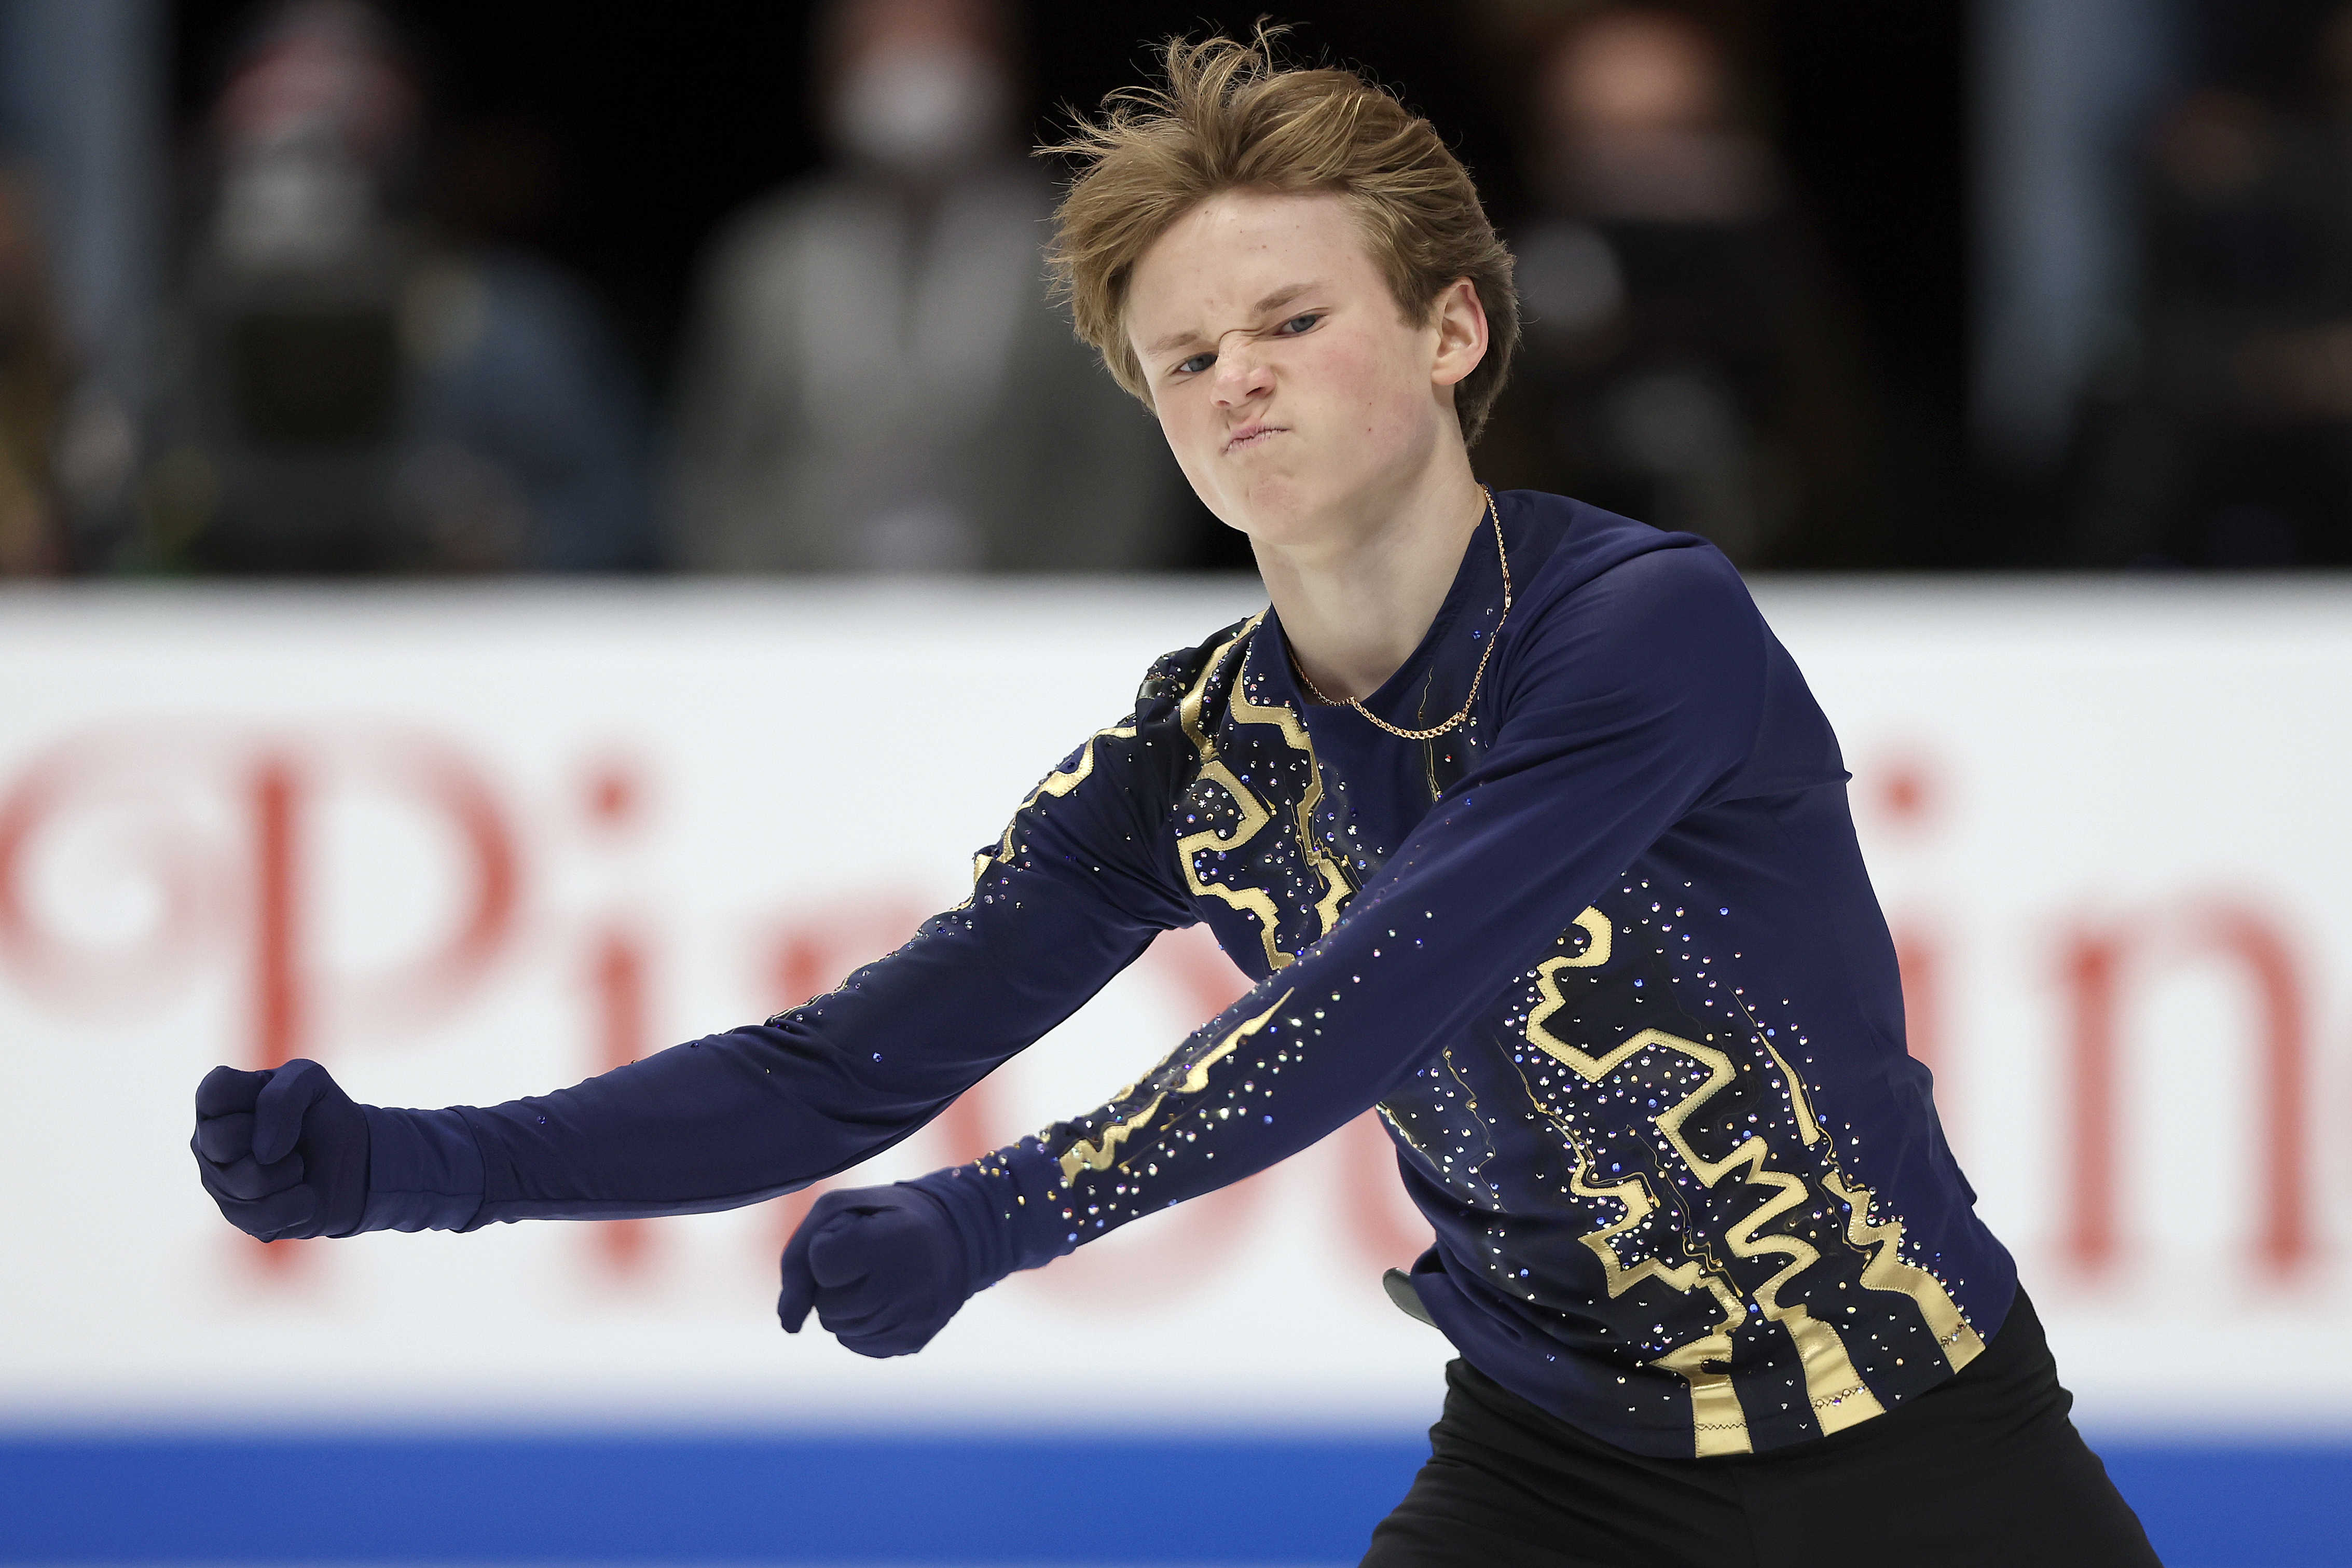 Why did US Figure Skating deny 17-year-old rising star Ilia Malinin a spot on the Olympic team?